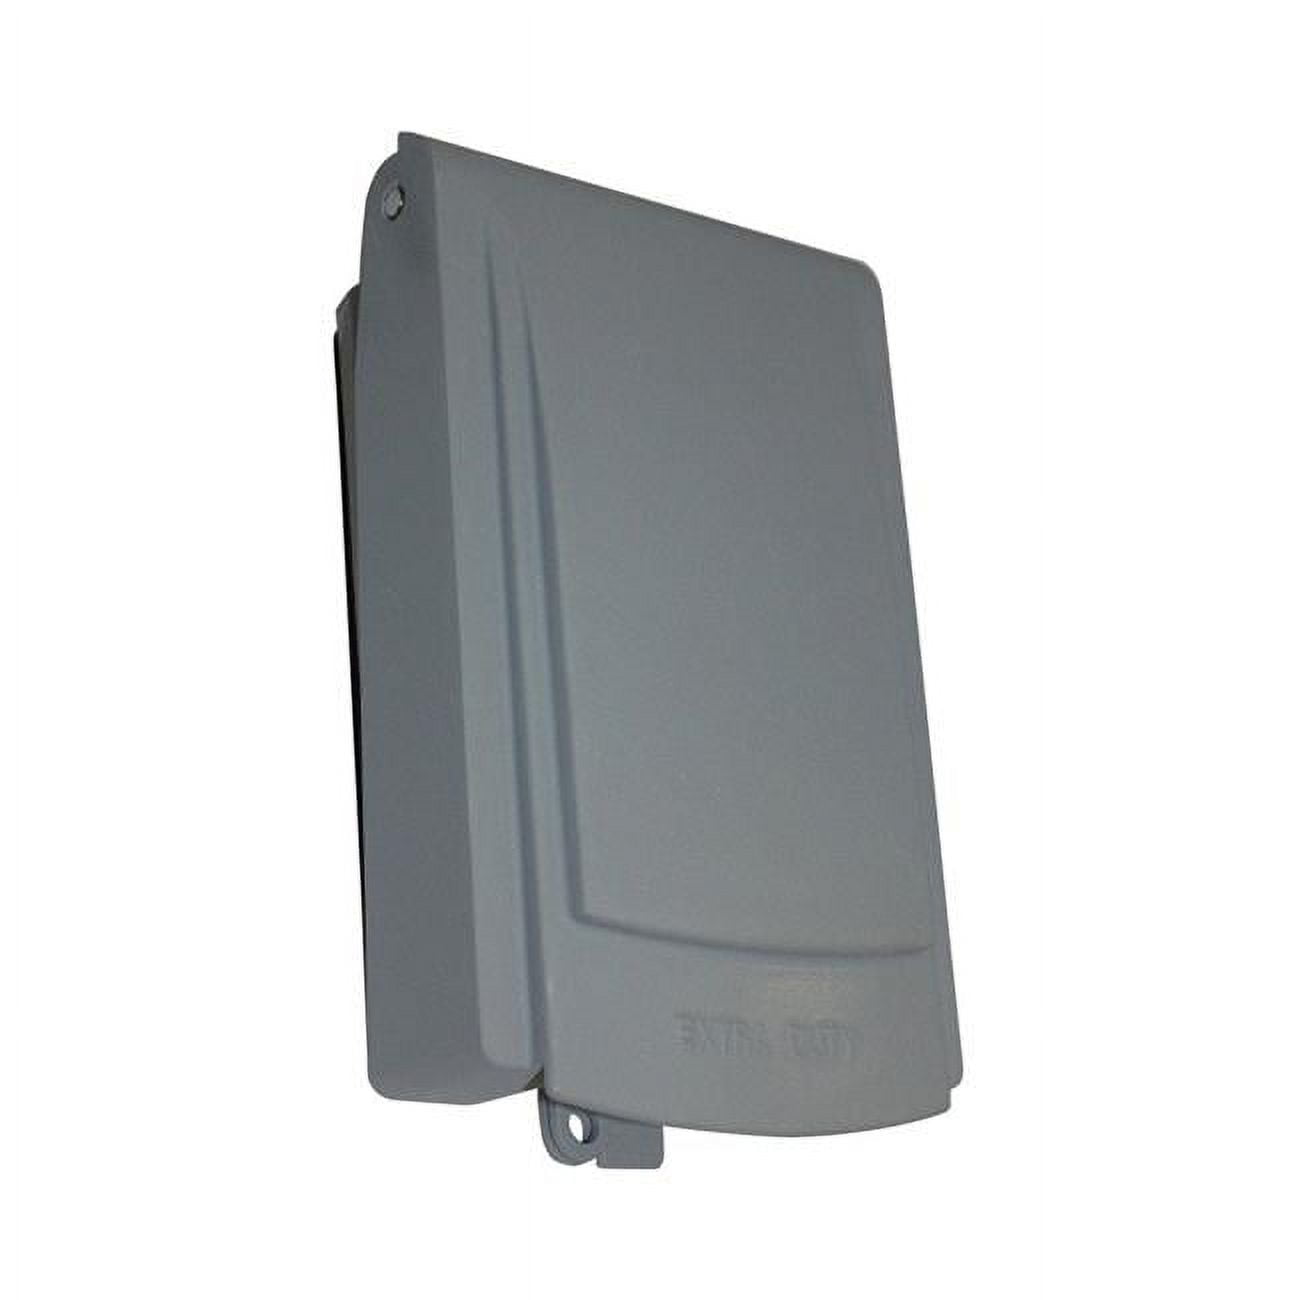 3549789 Slimline Rectangle Plastic 1 Gang In-use Cover For Protection From Weather Gray